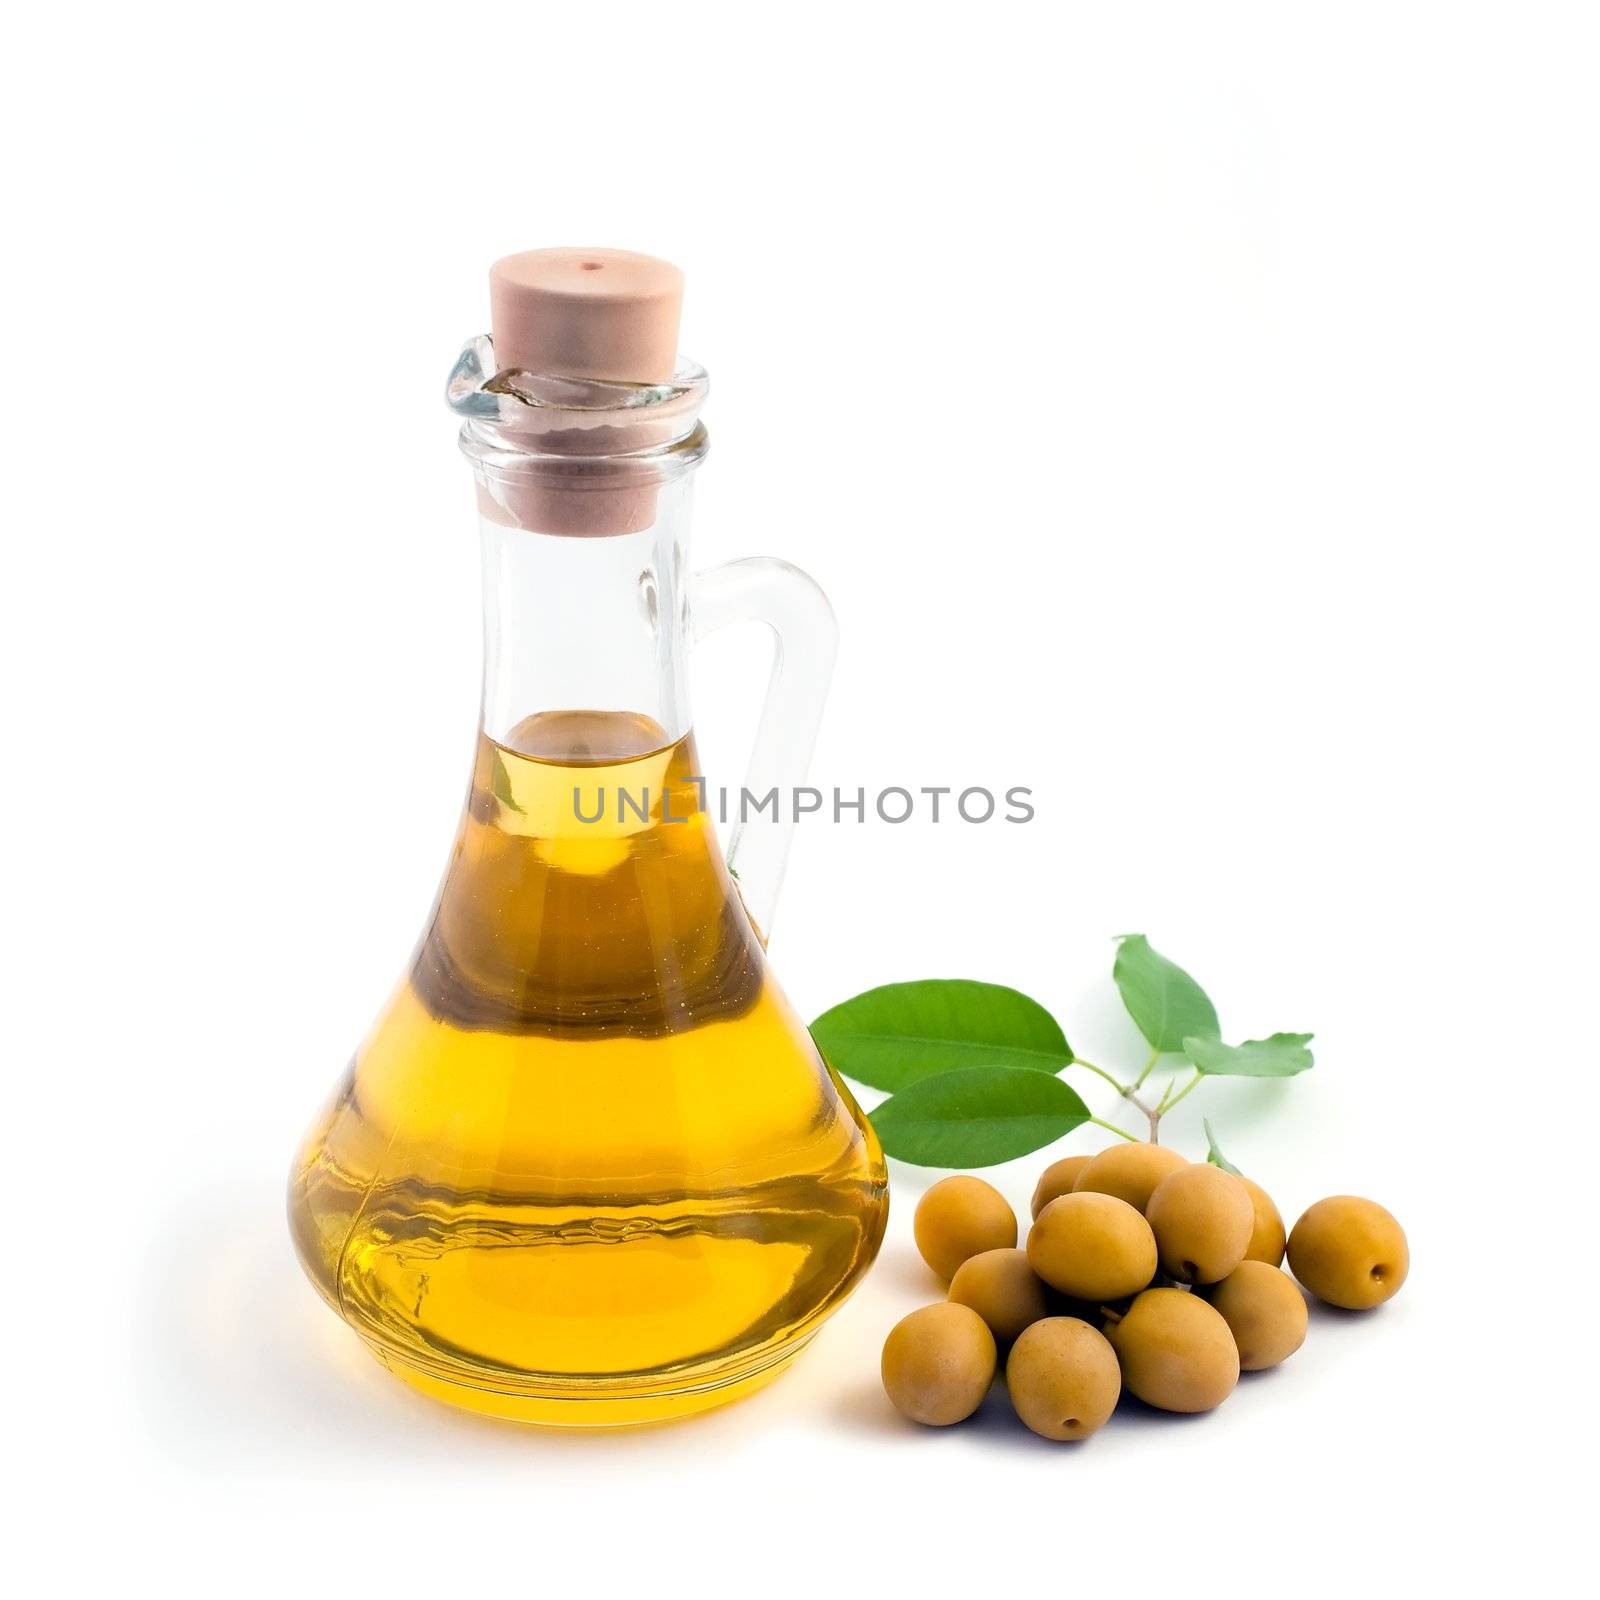 Green olives and bottle of oil on the table